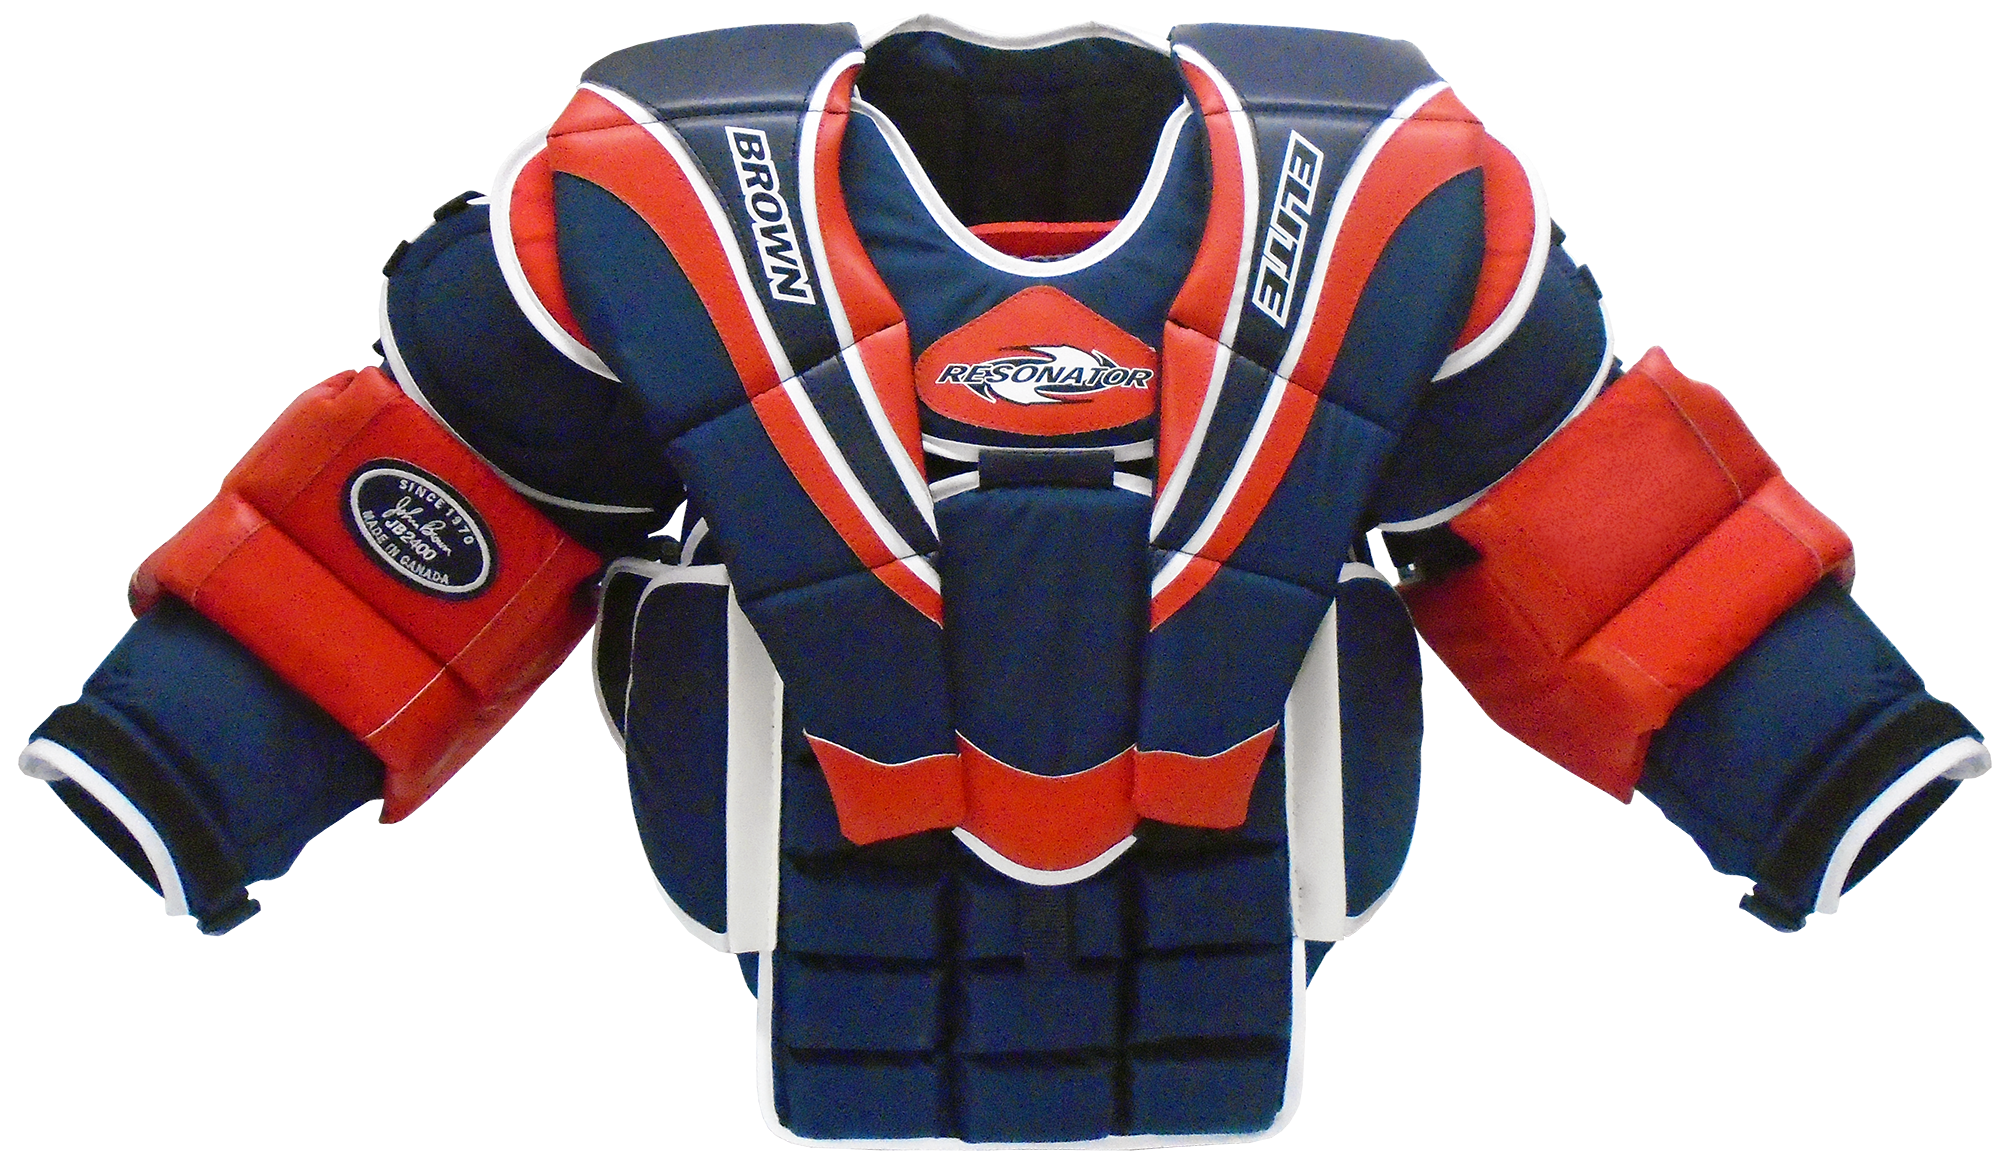 2400 blue, red, and white chest protector